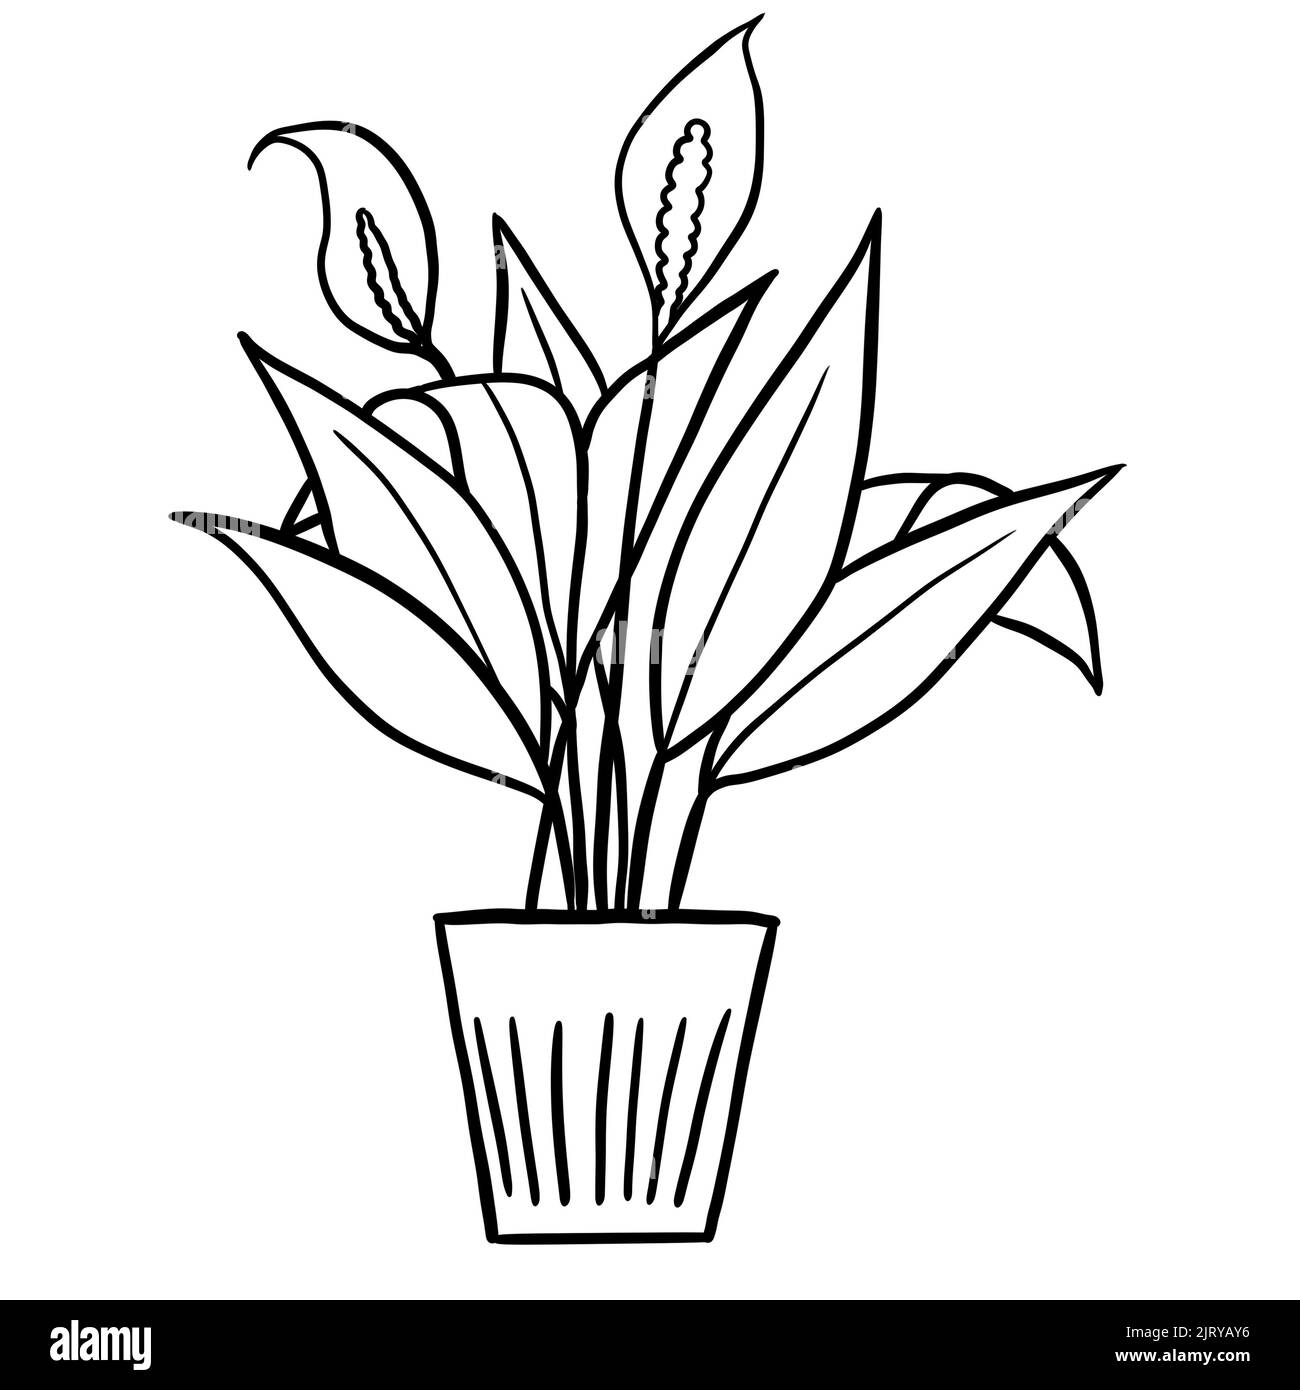 Peace lily spathiphyllum in a pot in black line outline cartoon style. Coloring book houseplants flowers plant for interrior design in simple minimalist design, plant lady gift Stock Photo